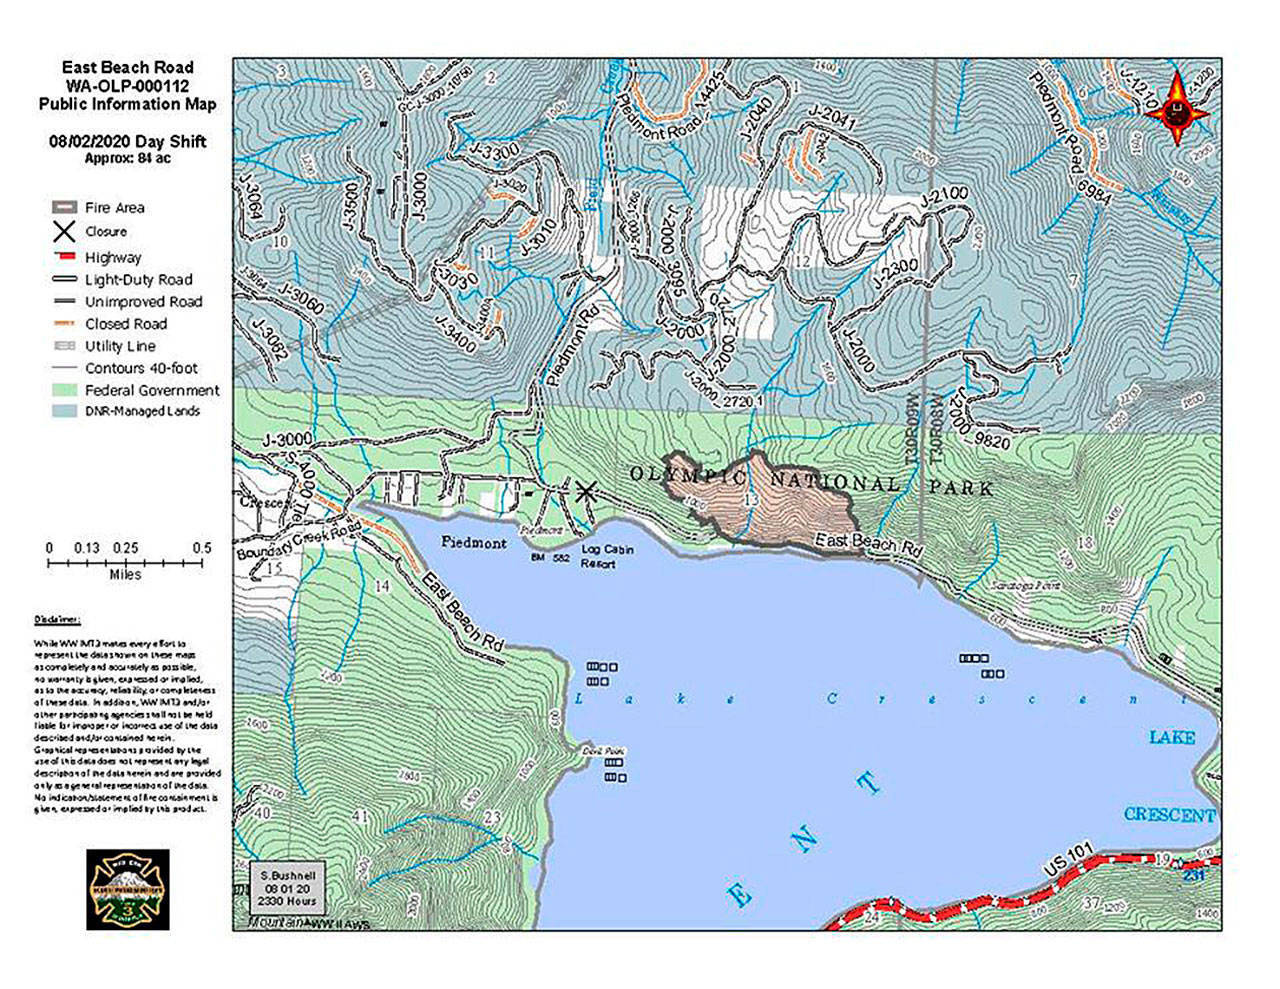 A map from the Western Washington Type 3 Incident Management Team shows the extent of the 84-acre East Beach Road Fire at Lake Crescent.